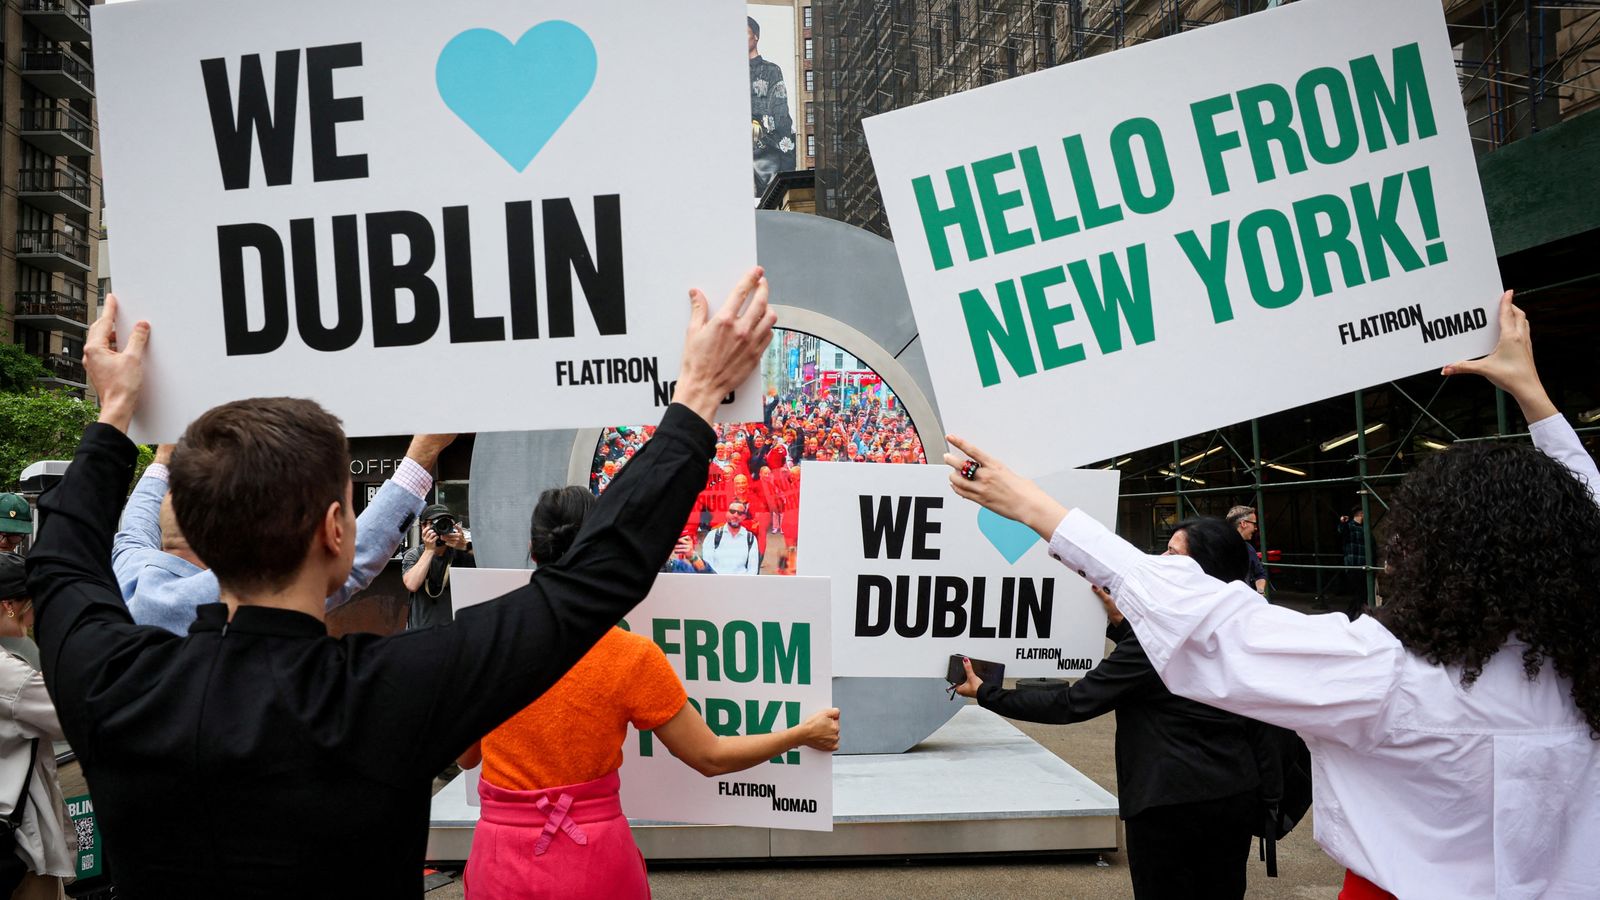 Portal connecting Dublin and New York 'reawakens' under new restrictions after 'inappropriate behaviour'